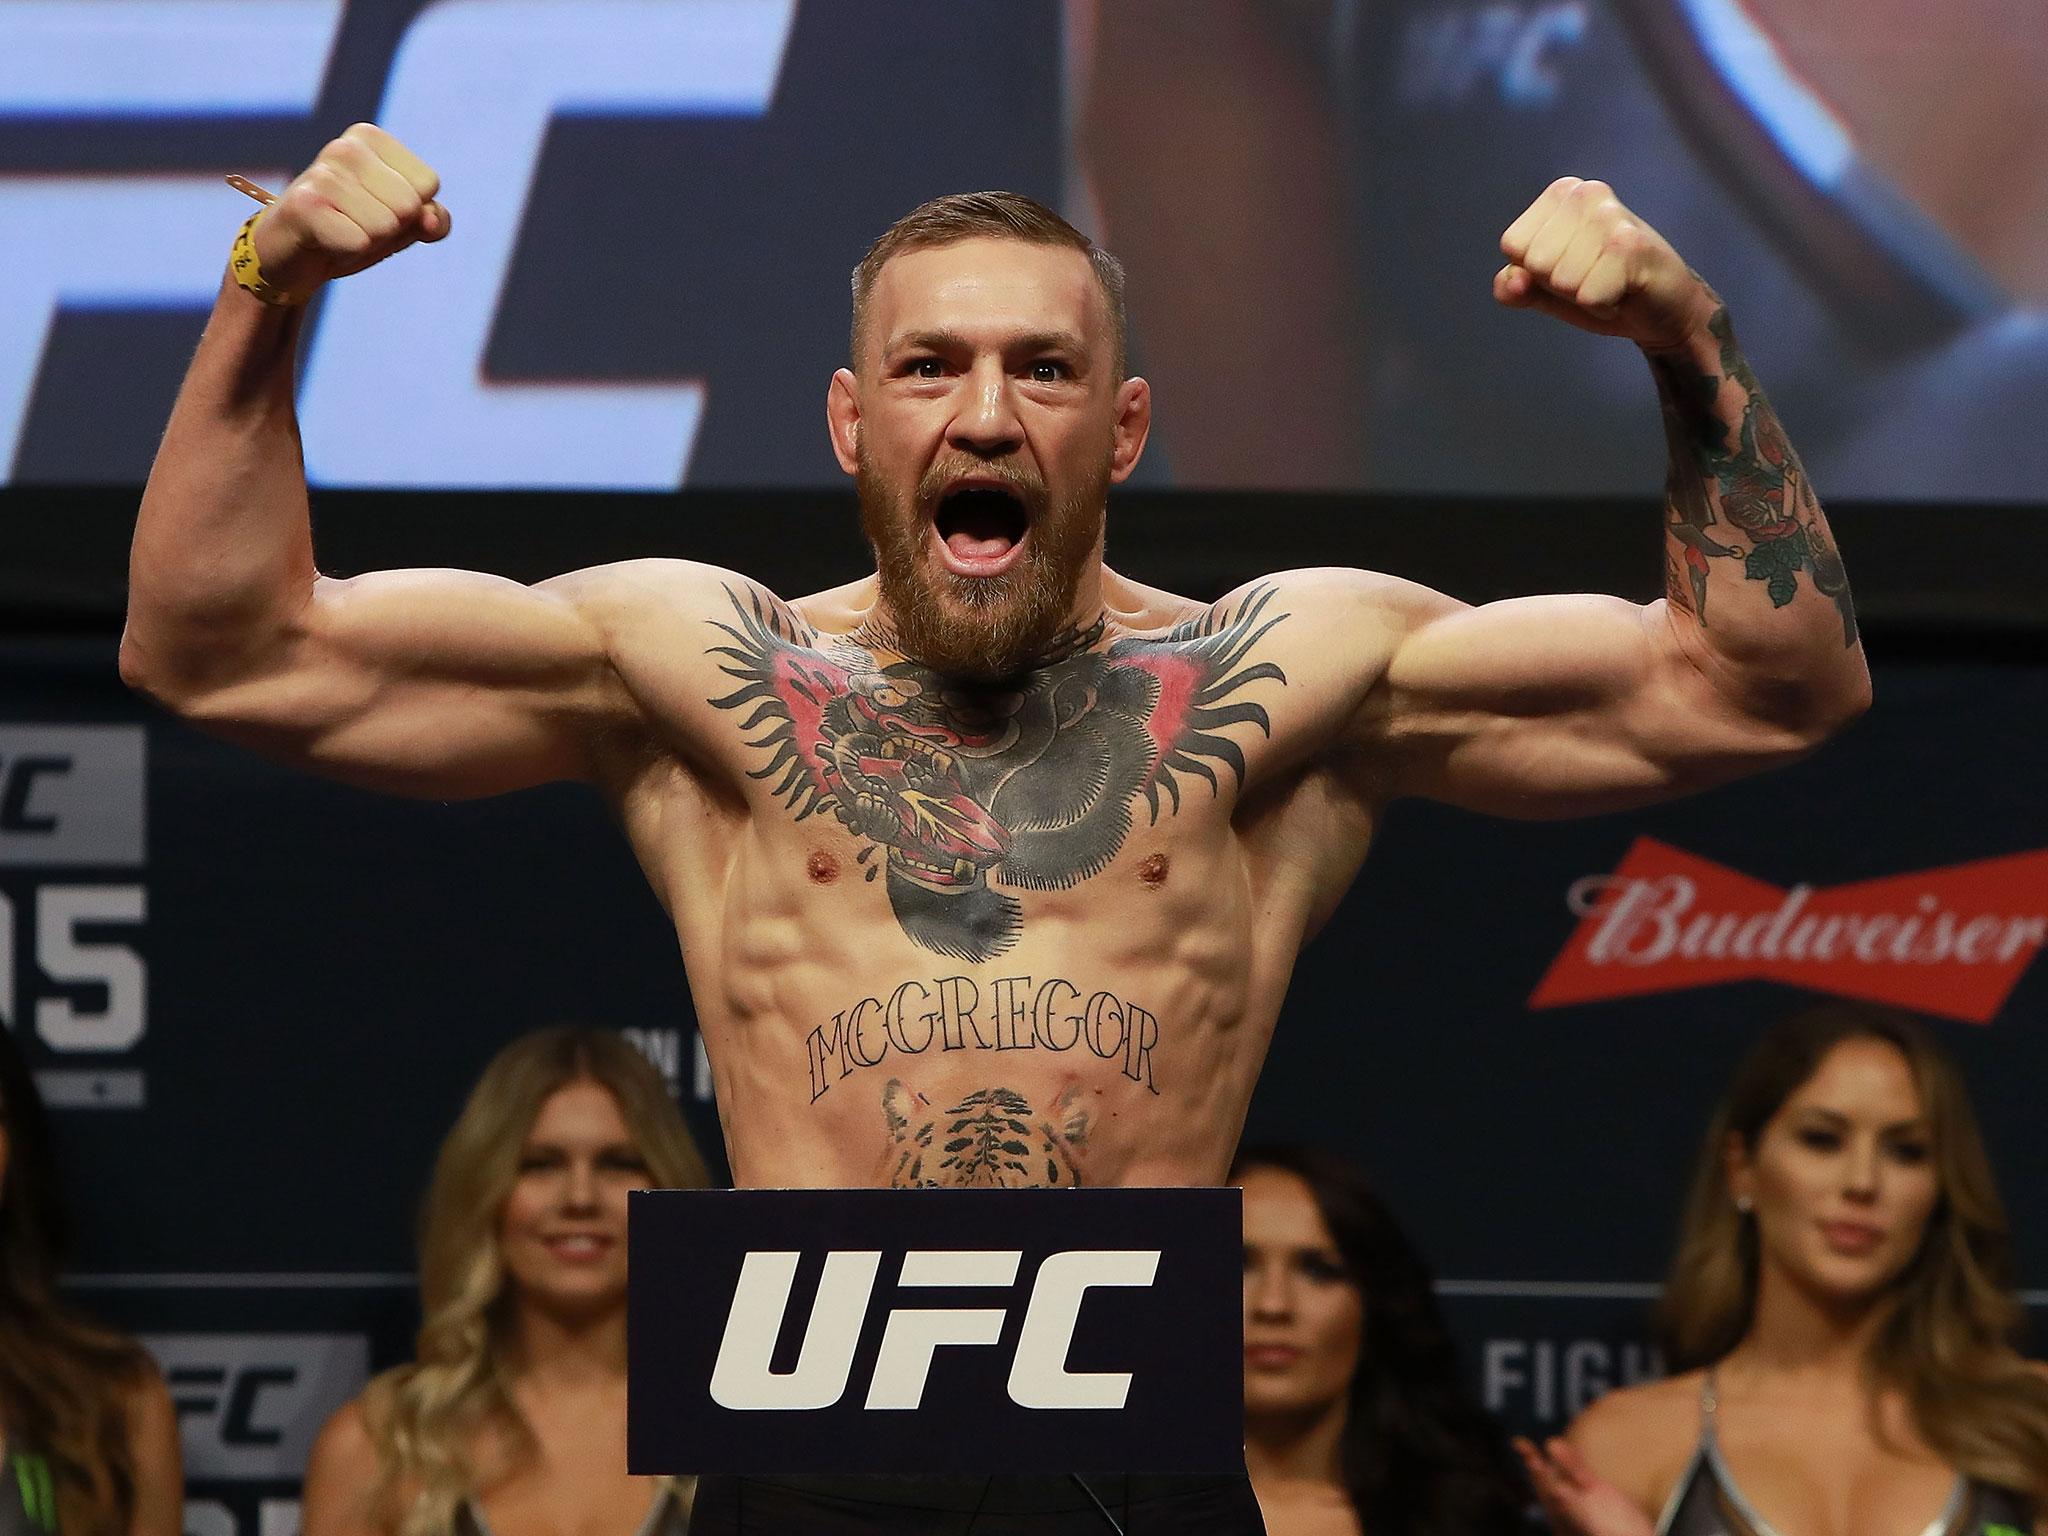 UFC Lightweight Champion and general all-round showboat Conor McGregor is Irish